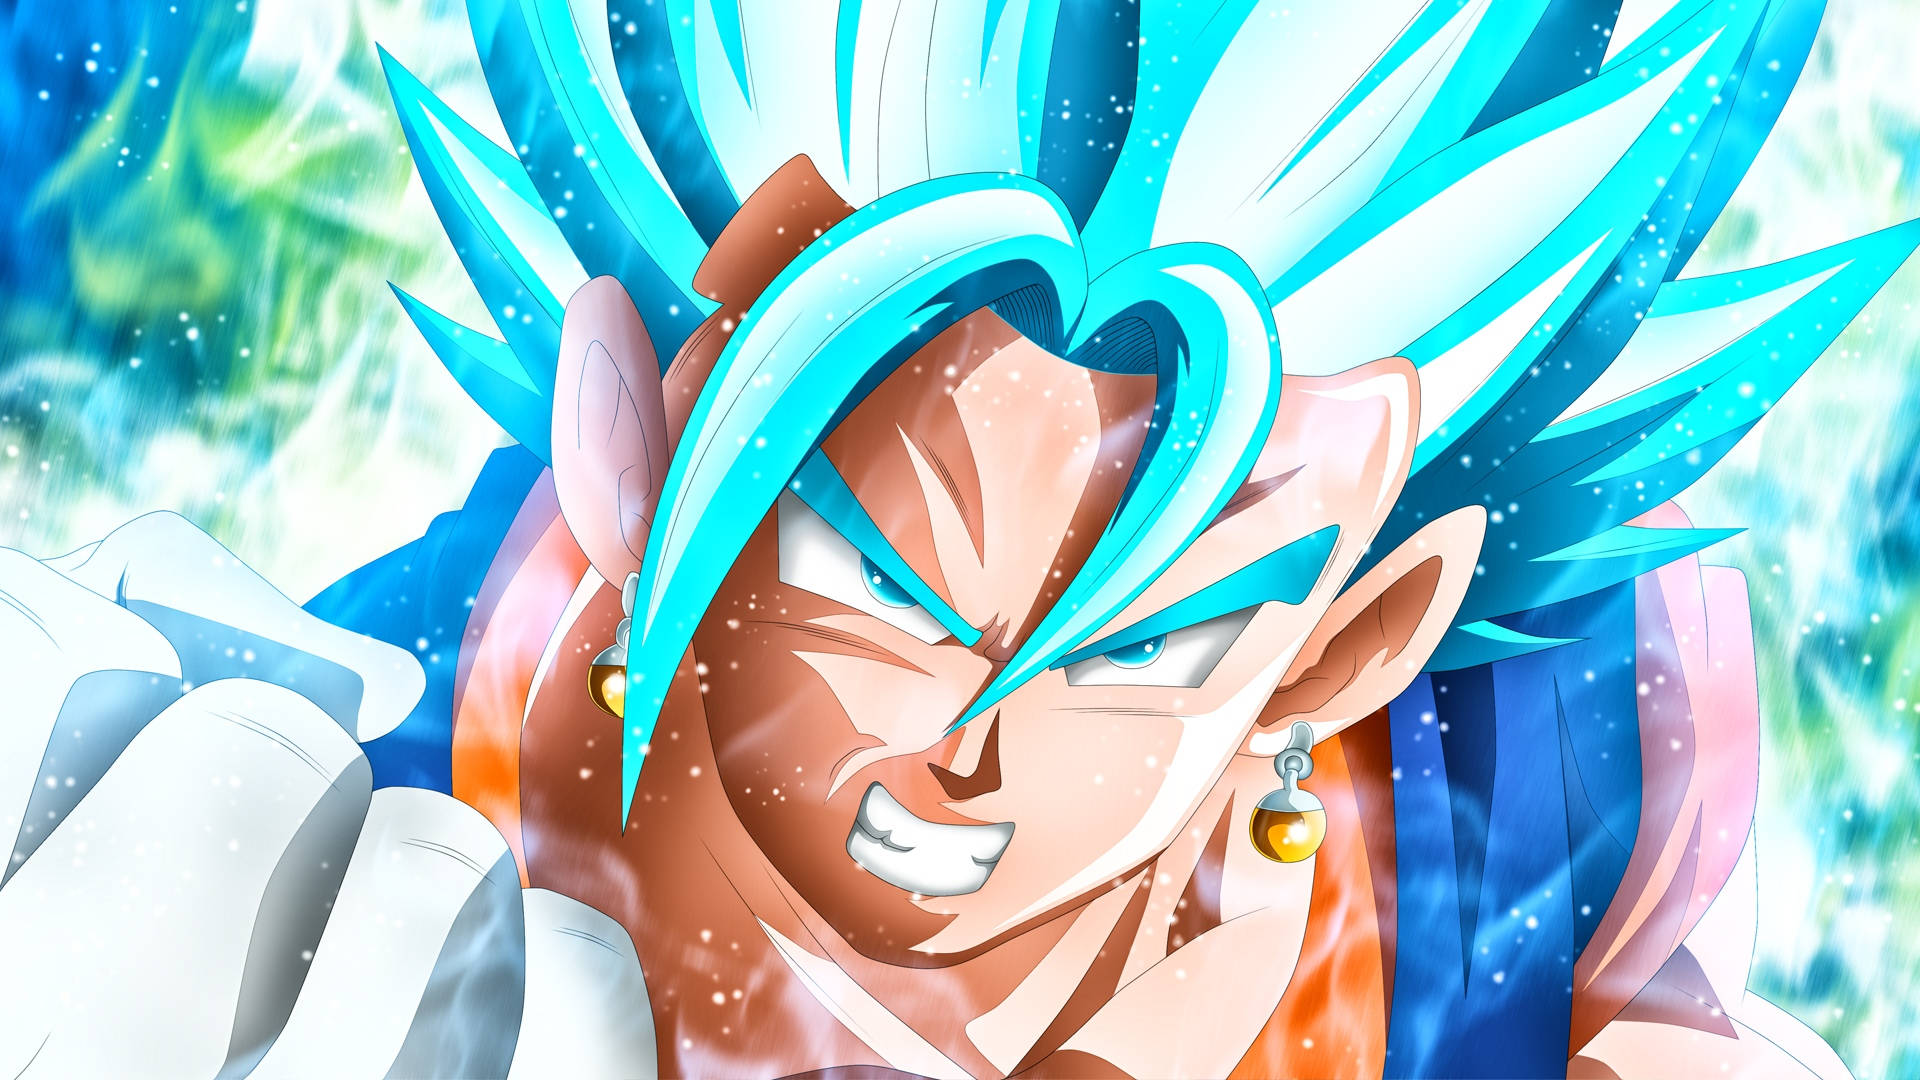 Blue-haired Vegito Clenching His Fist Background